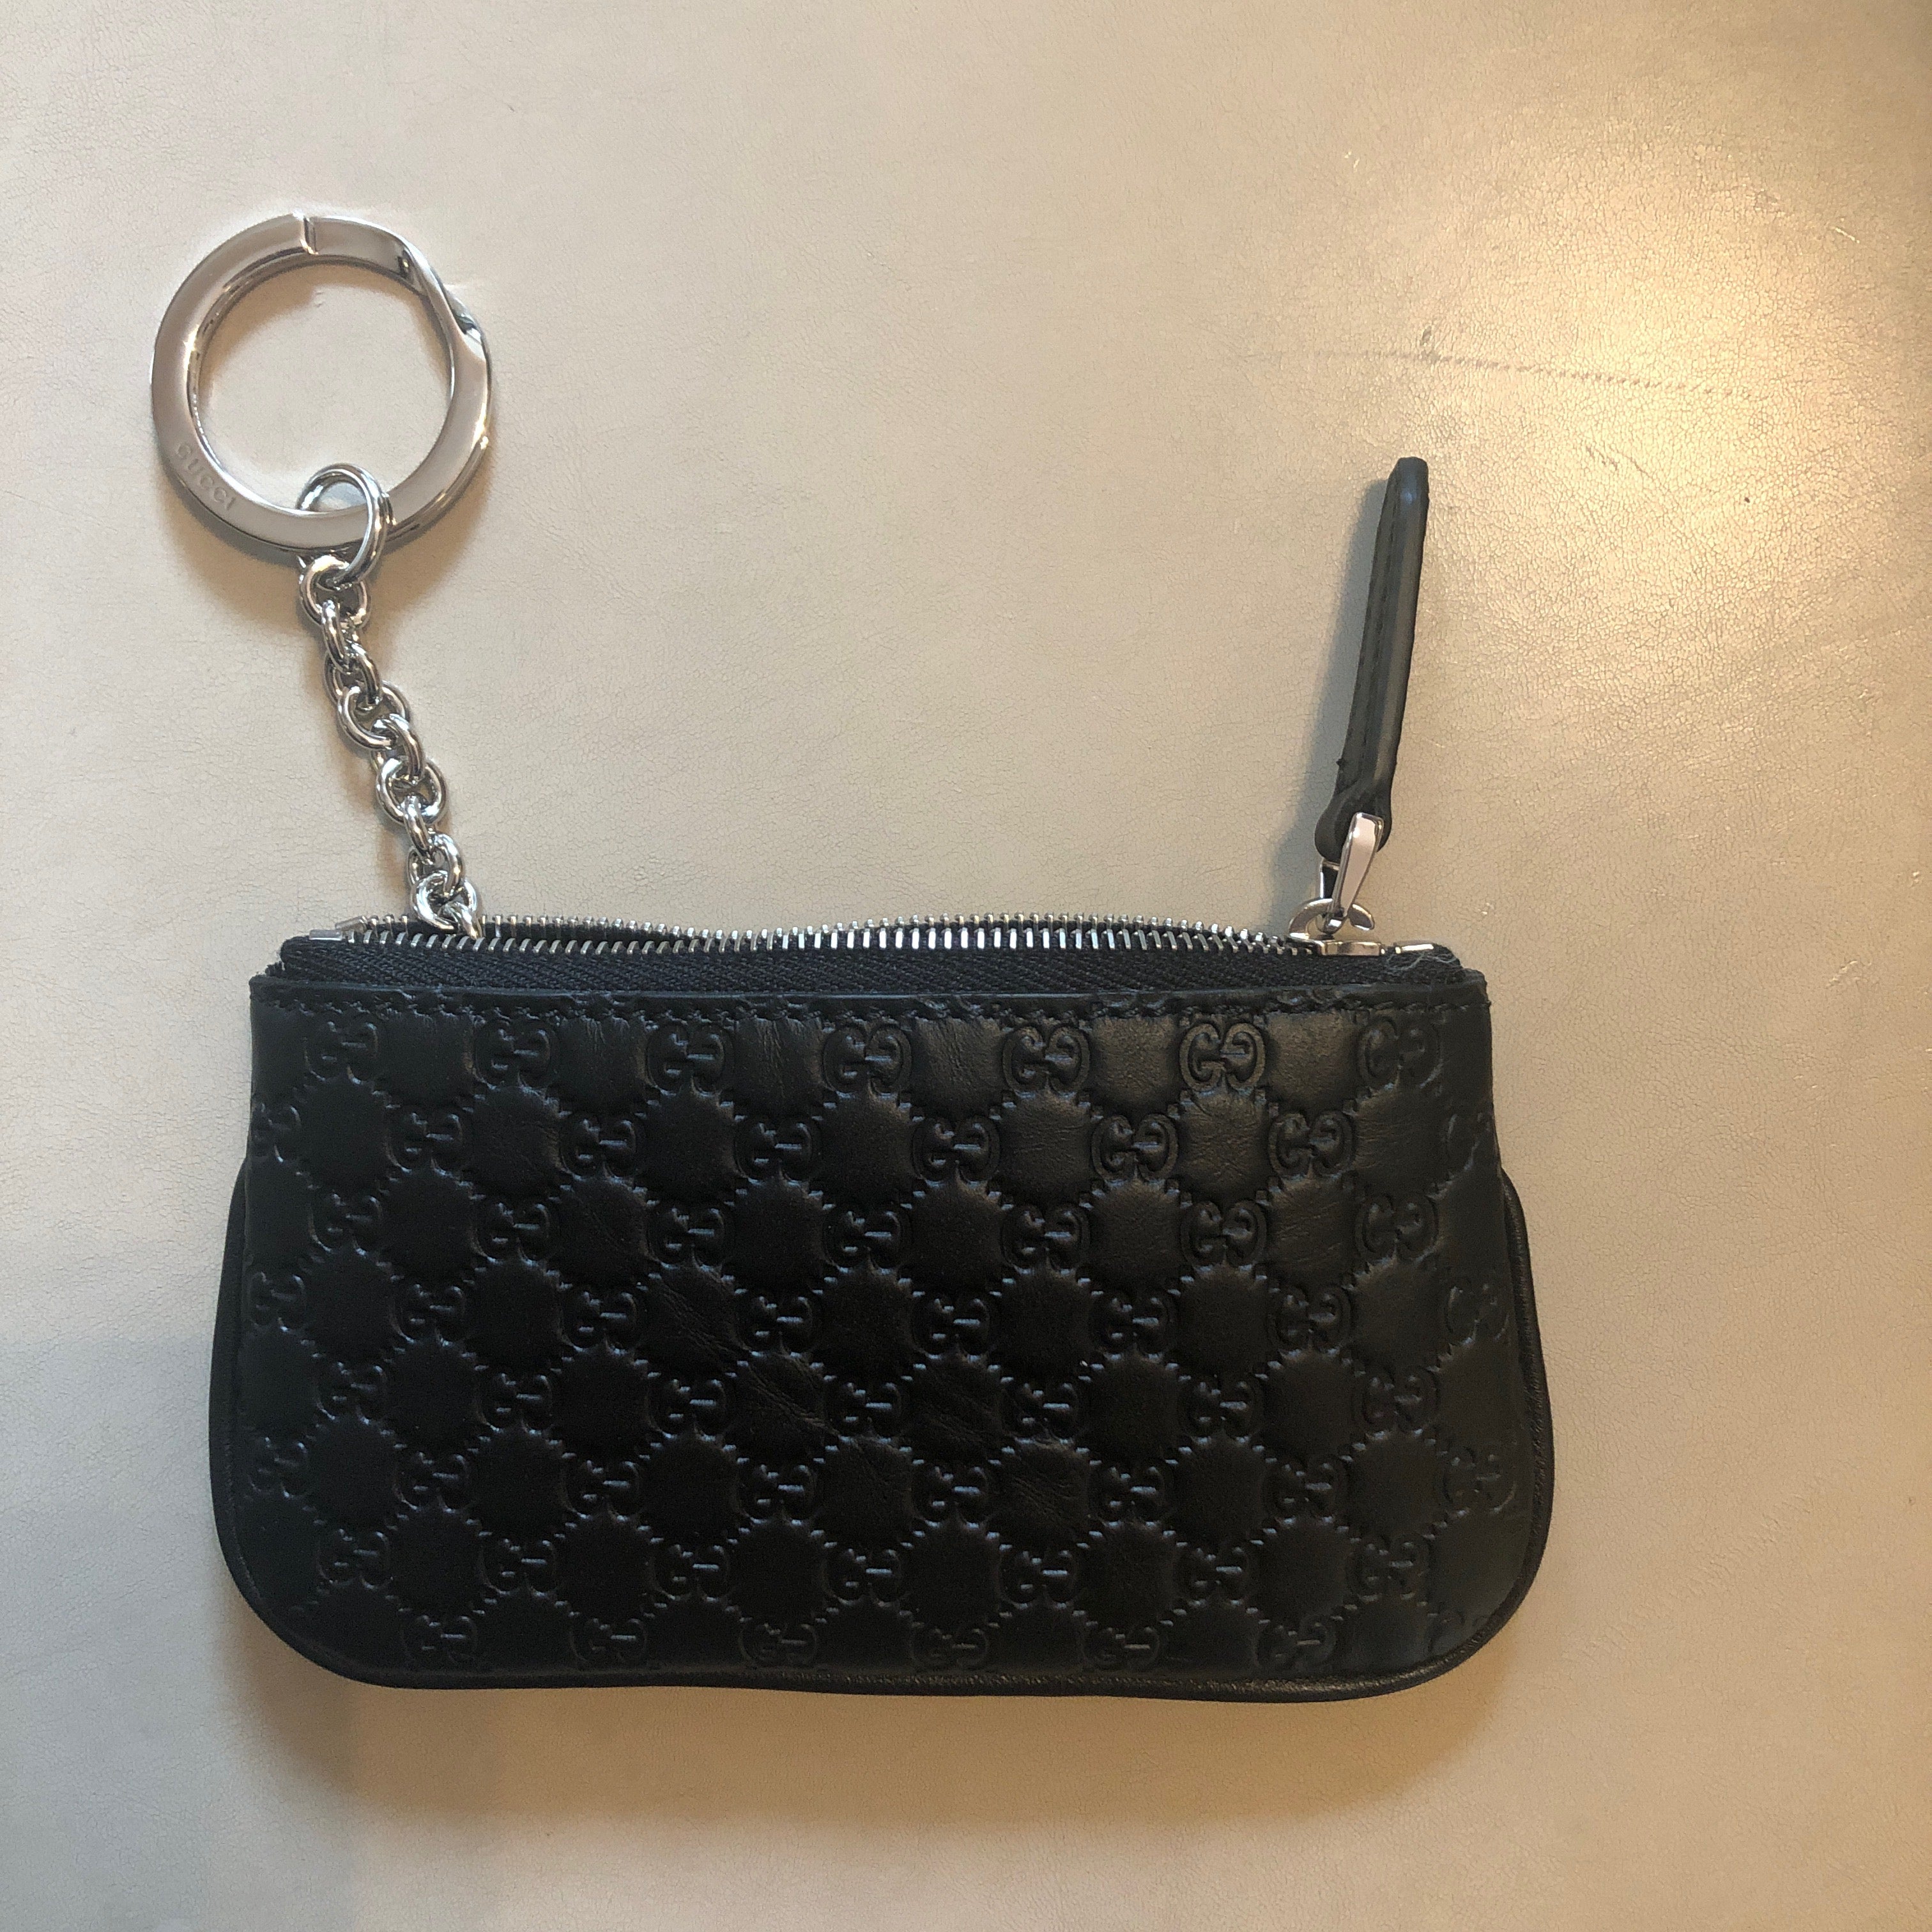 My easy pouch came! I compared it to the Gucci super mini & the Mini PA. It  fit my Rosalie coin purse, 6 key ring, and a lip oil in it. You